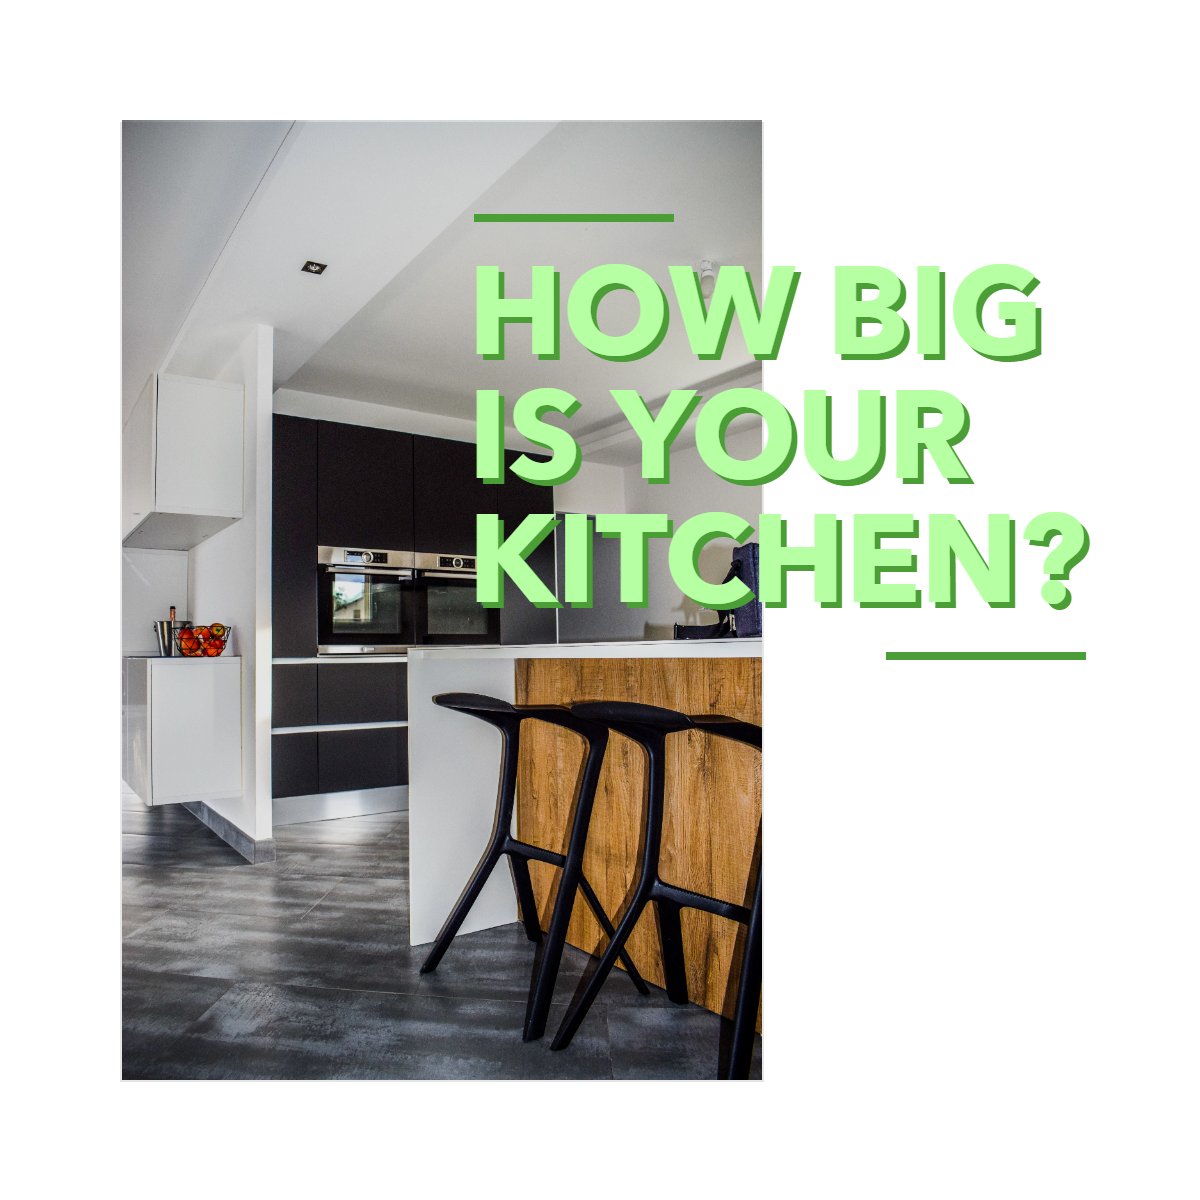 In the US, the average kitchen size for single homes is 161 square feet.

How big is your kitchen? 

#realestate #kitchensize #kitchen #homes
 #AmericasMortgageSolutions #christianpenner #onestopbrokershop #mortgagebrokerwestpalmbeach #epicrealeststedeals